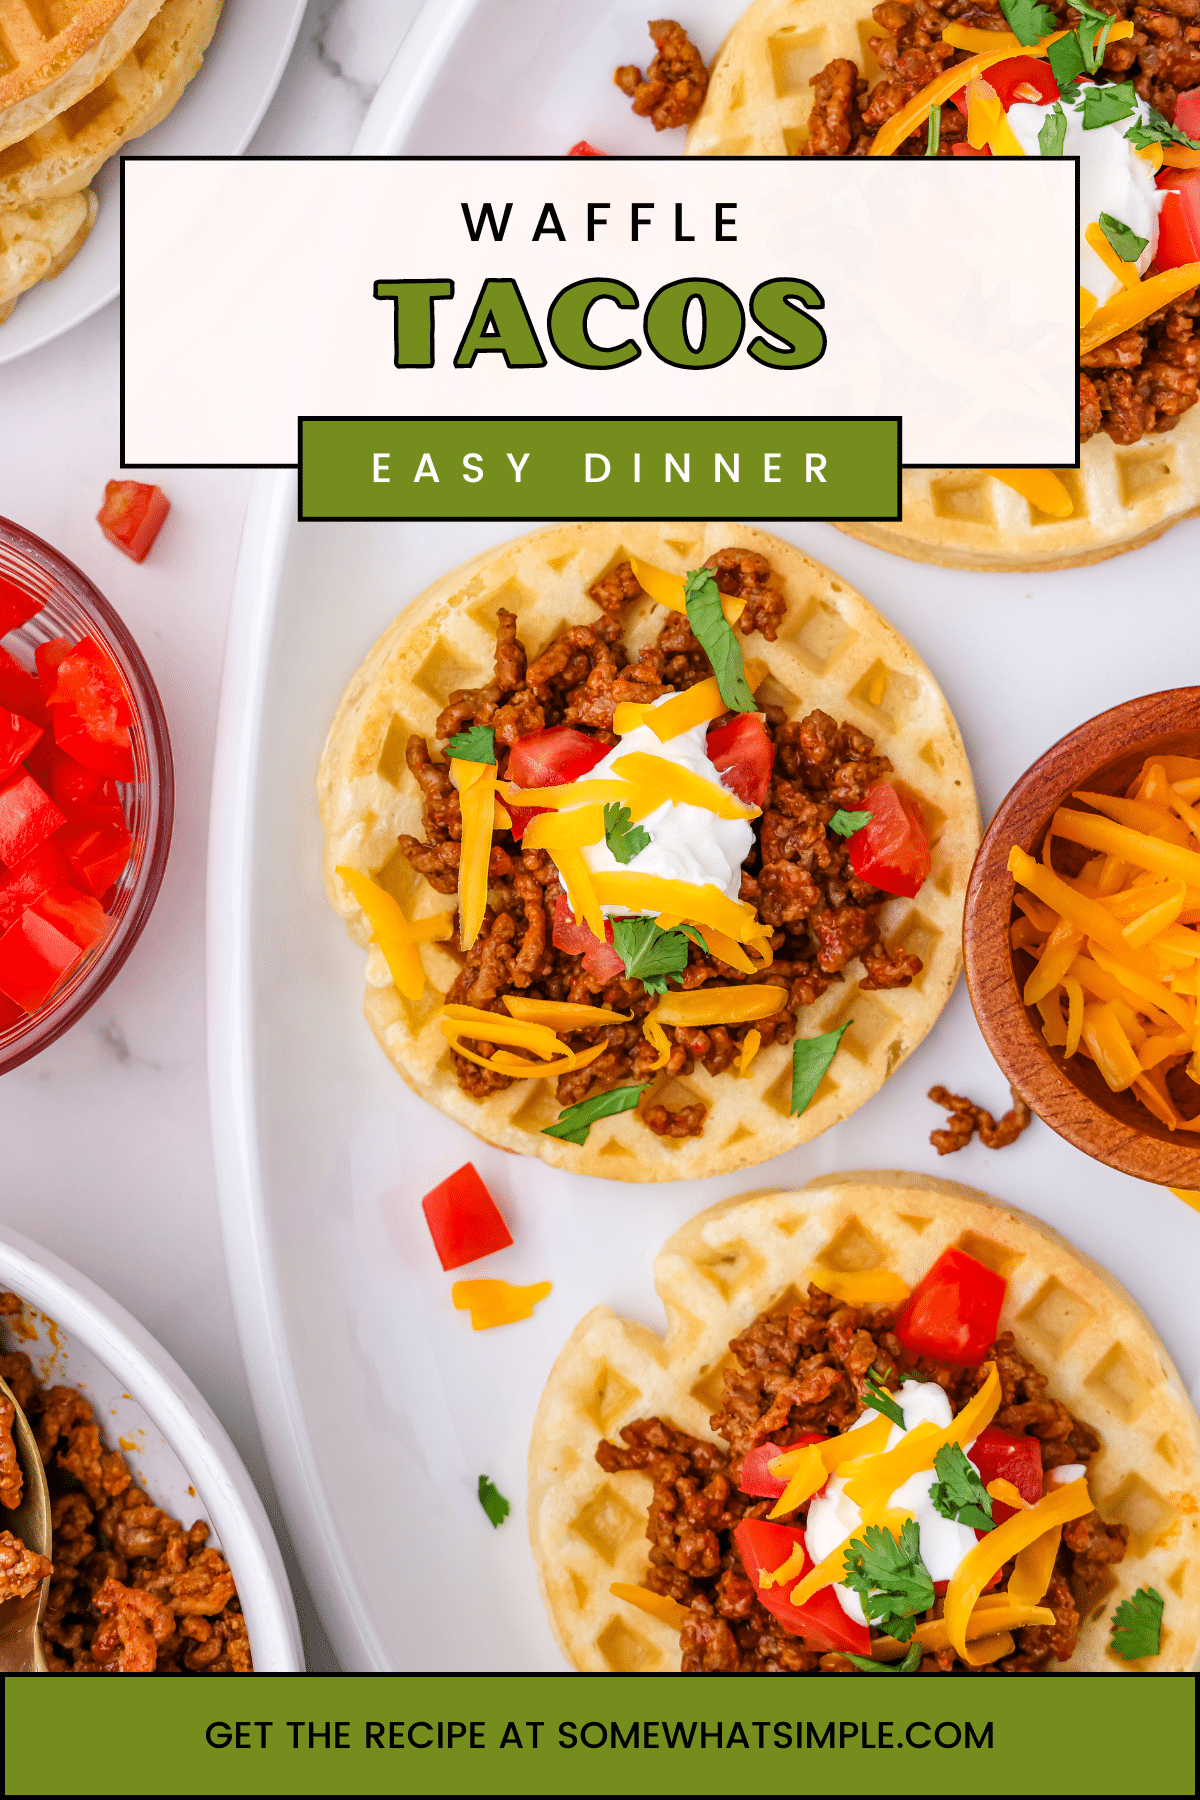 Waffle Tacos are the best of both taco worlds! The crisp edges give it the crunch of a hard shell taco, but the soft inside gives it the chewiness of a soft taco. Everyone gets fed, and everyone is happy! #waffles #tacos #easydinner #vegetarian #glutenfree via @somewhatsimple